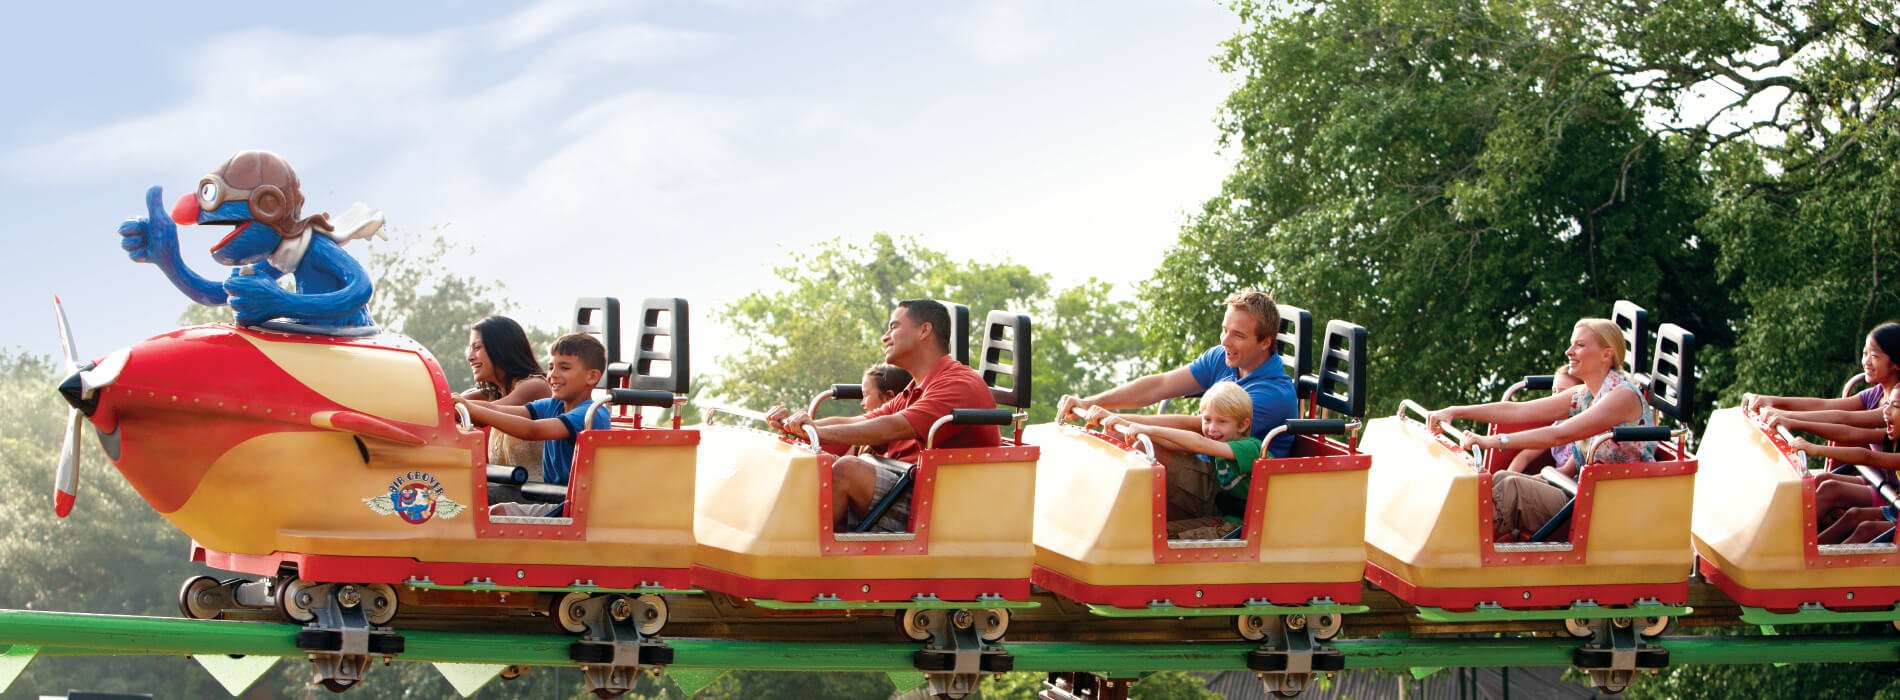 Kids riding a yellow and red roller coaster with adults called Air Grover at Busch Gardens Tampa Bay animal theme park, located in Florida